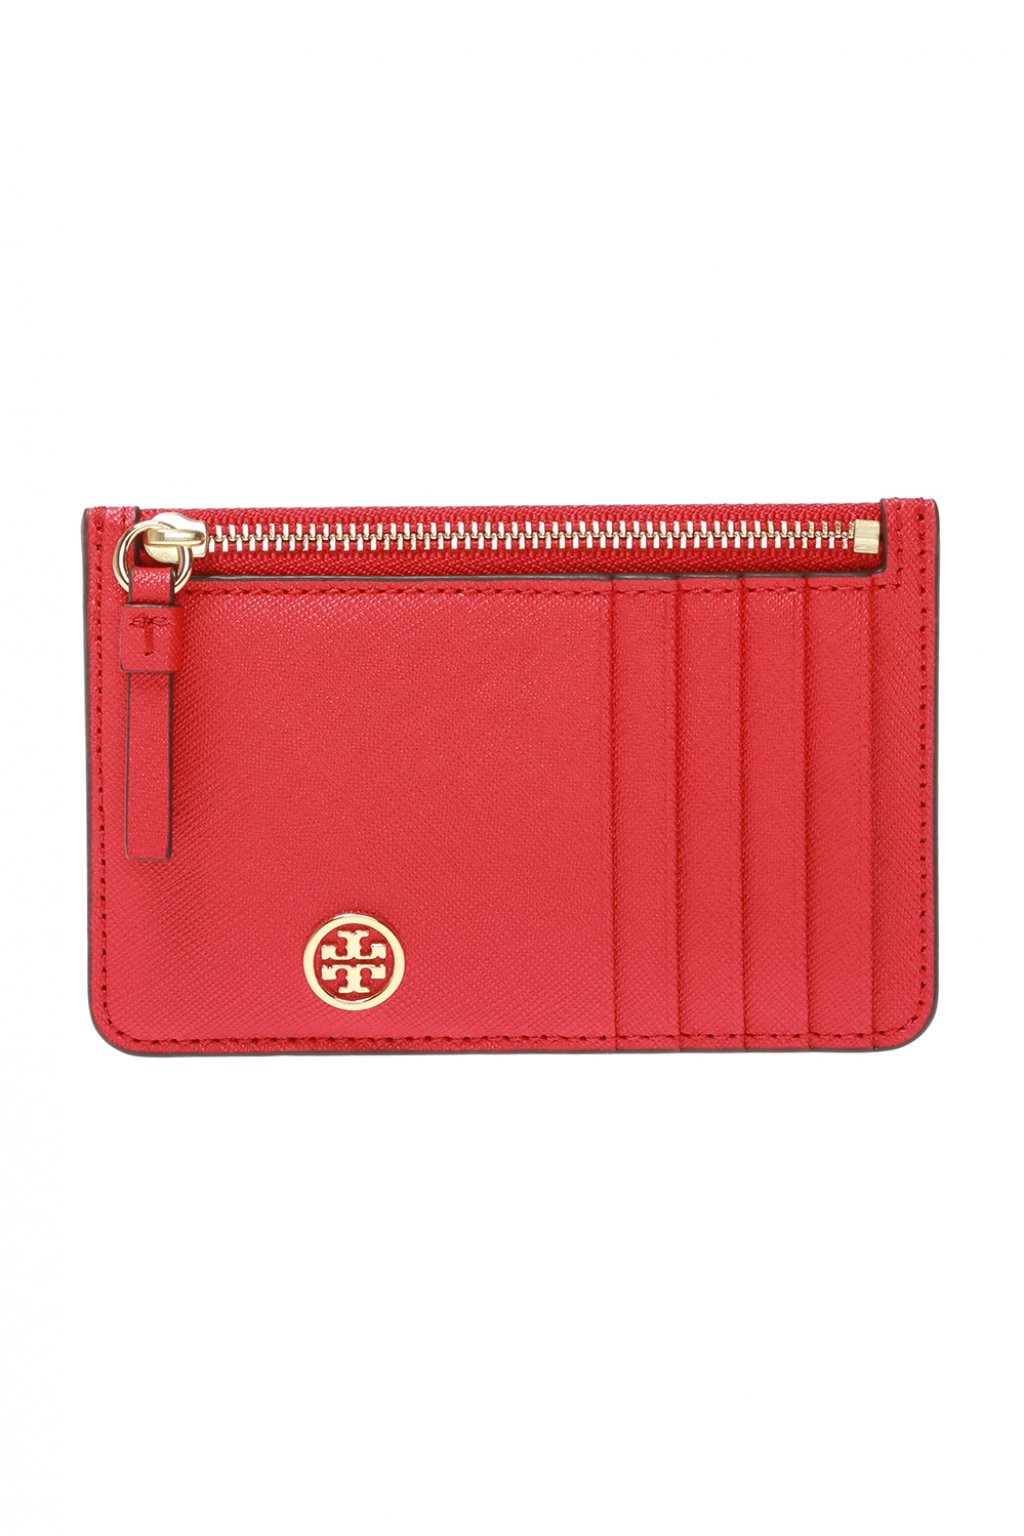 Red Card holder with logo Tory Burch - Vitkac Germany